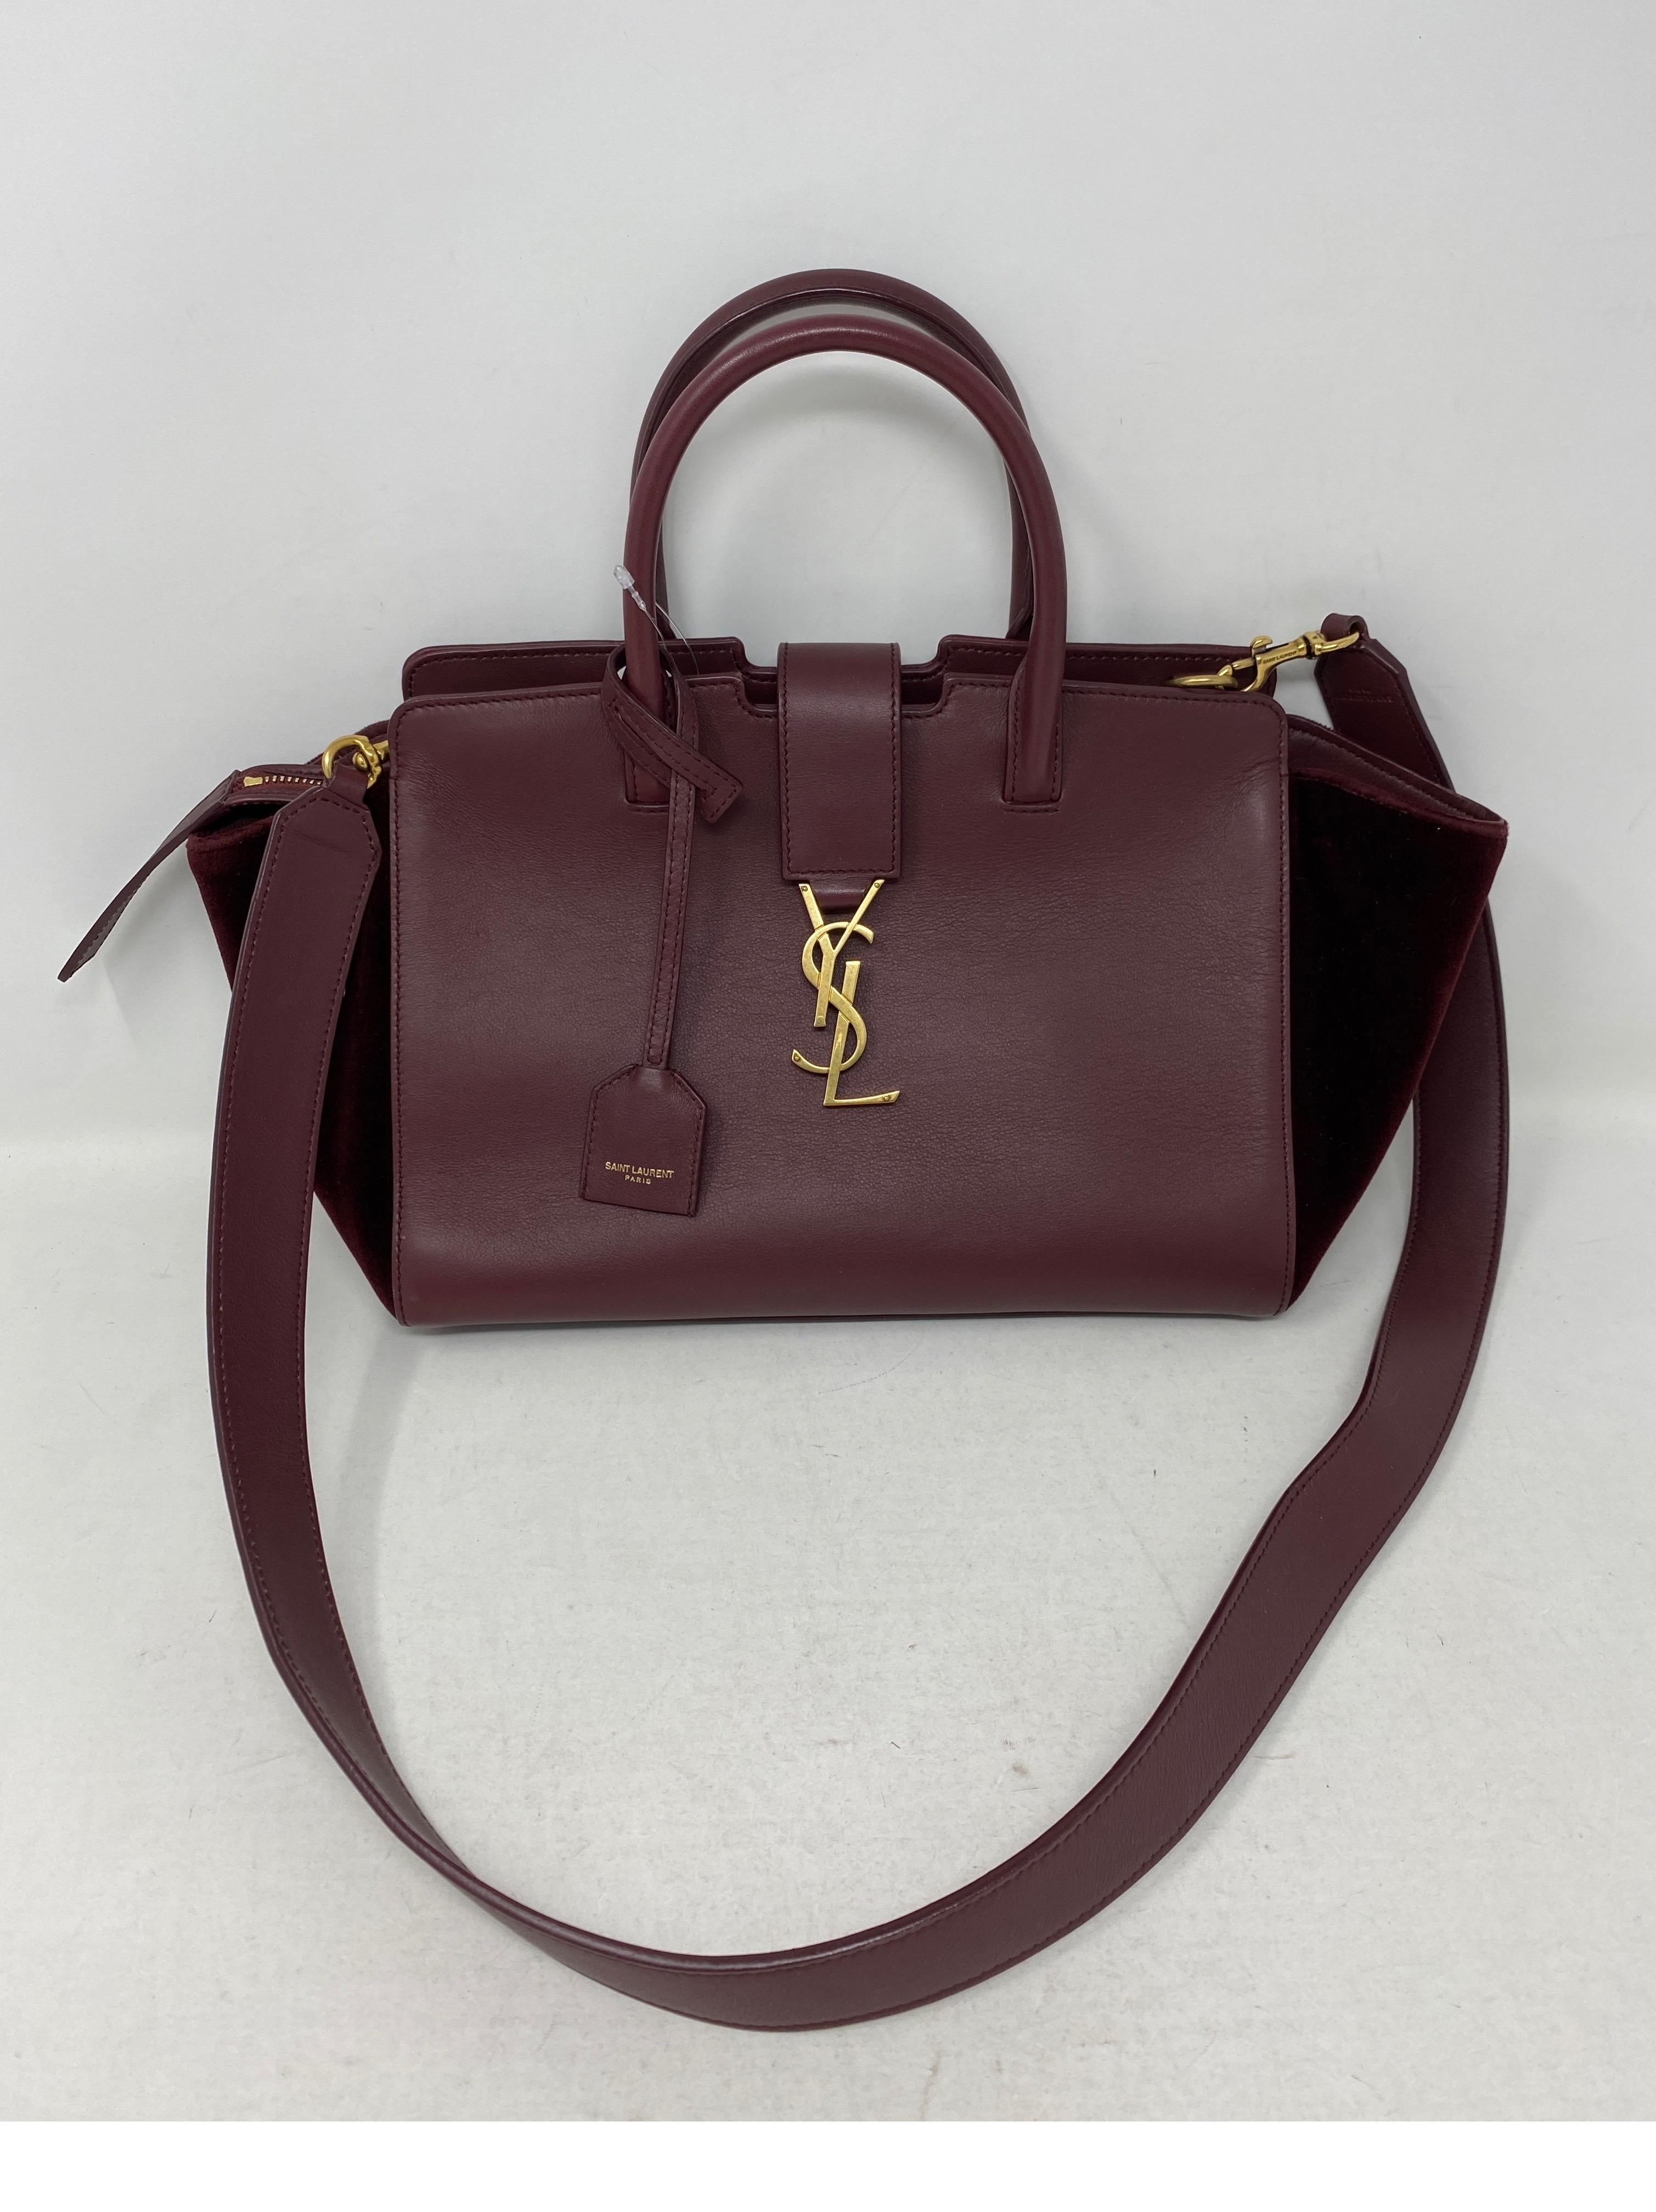 YSL Cabas Burgundy Bag. Gold hardware. Can be worn 2 ways. Good condition. Guaranteed authentic. 